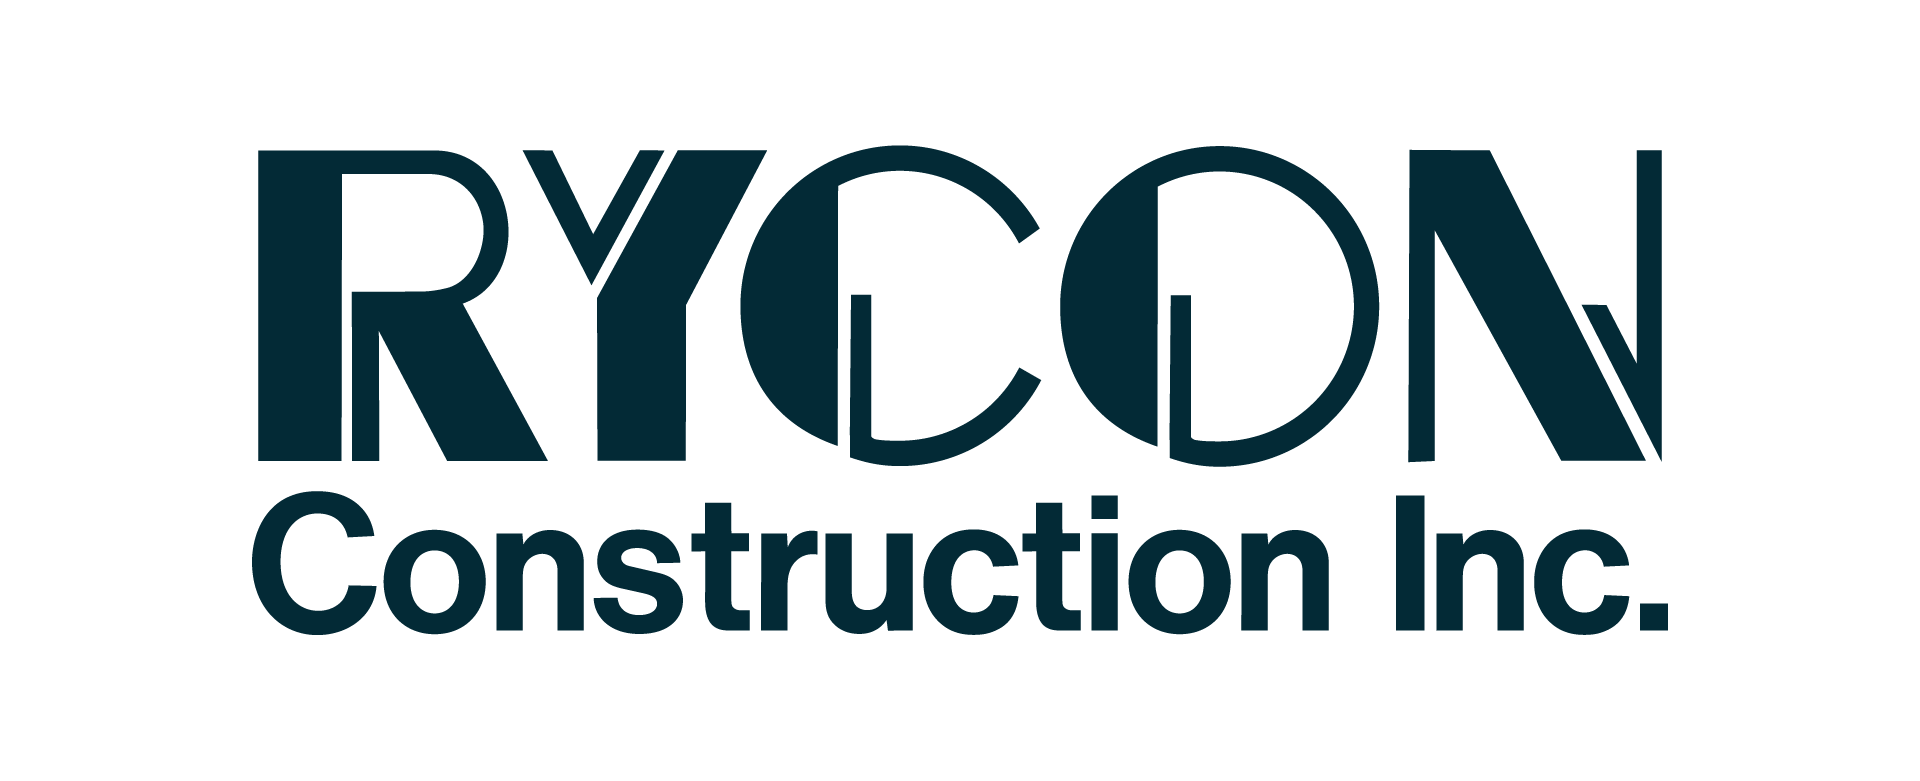 Rycon Construction, Inc. | General Contracting & Construction Management